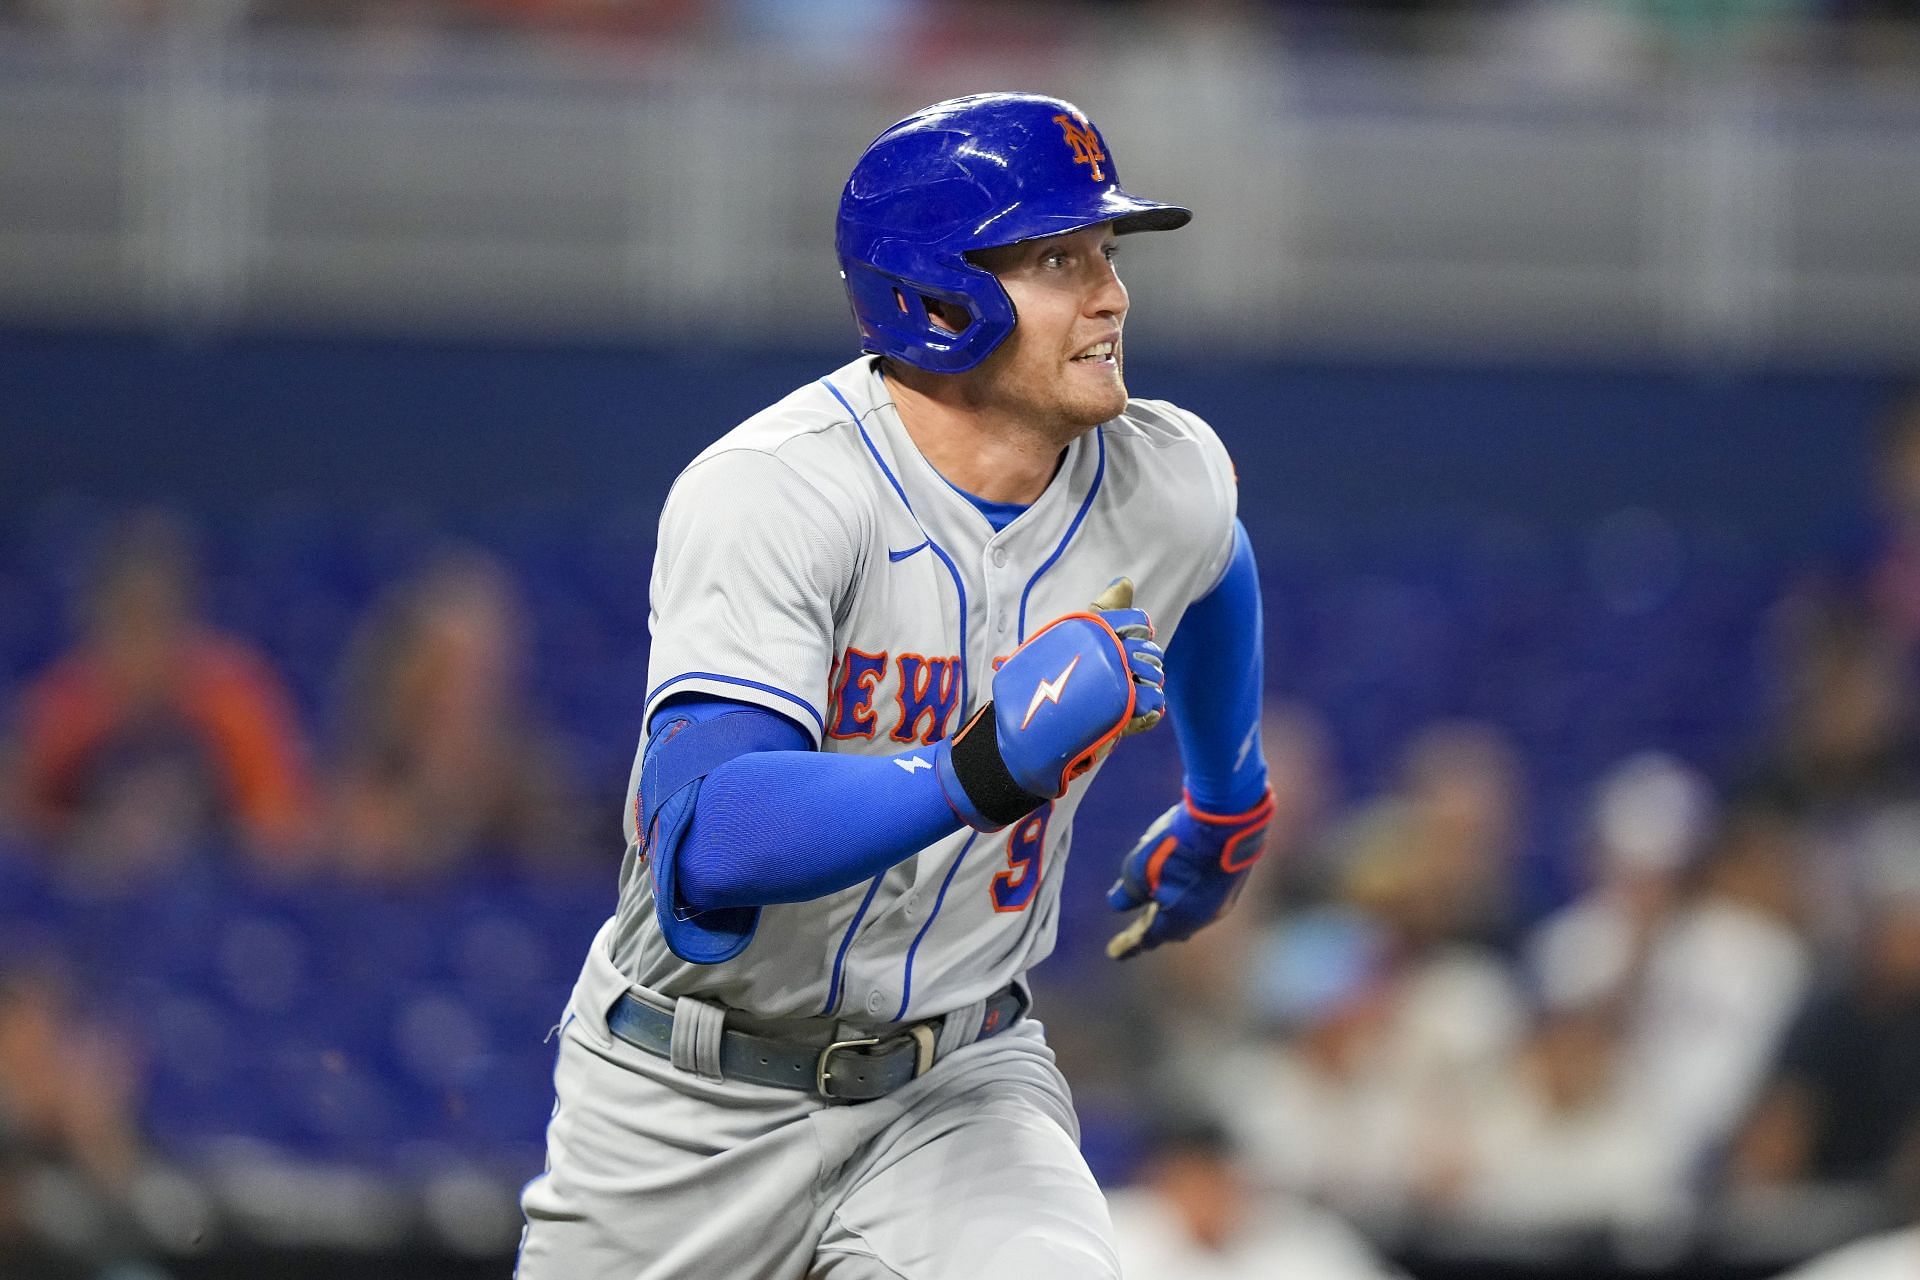 Brandon Nimmo enters play today with a slash line of .272/.354/.424.